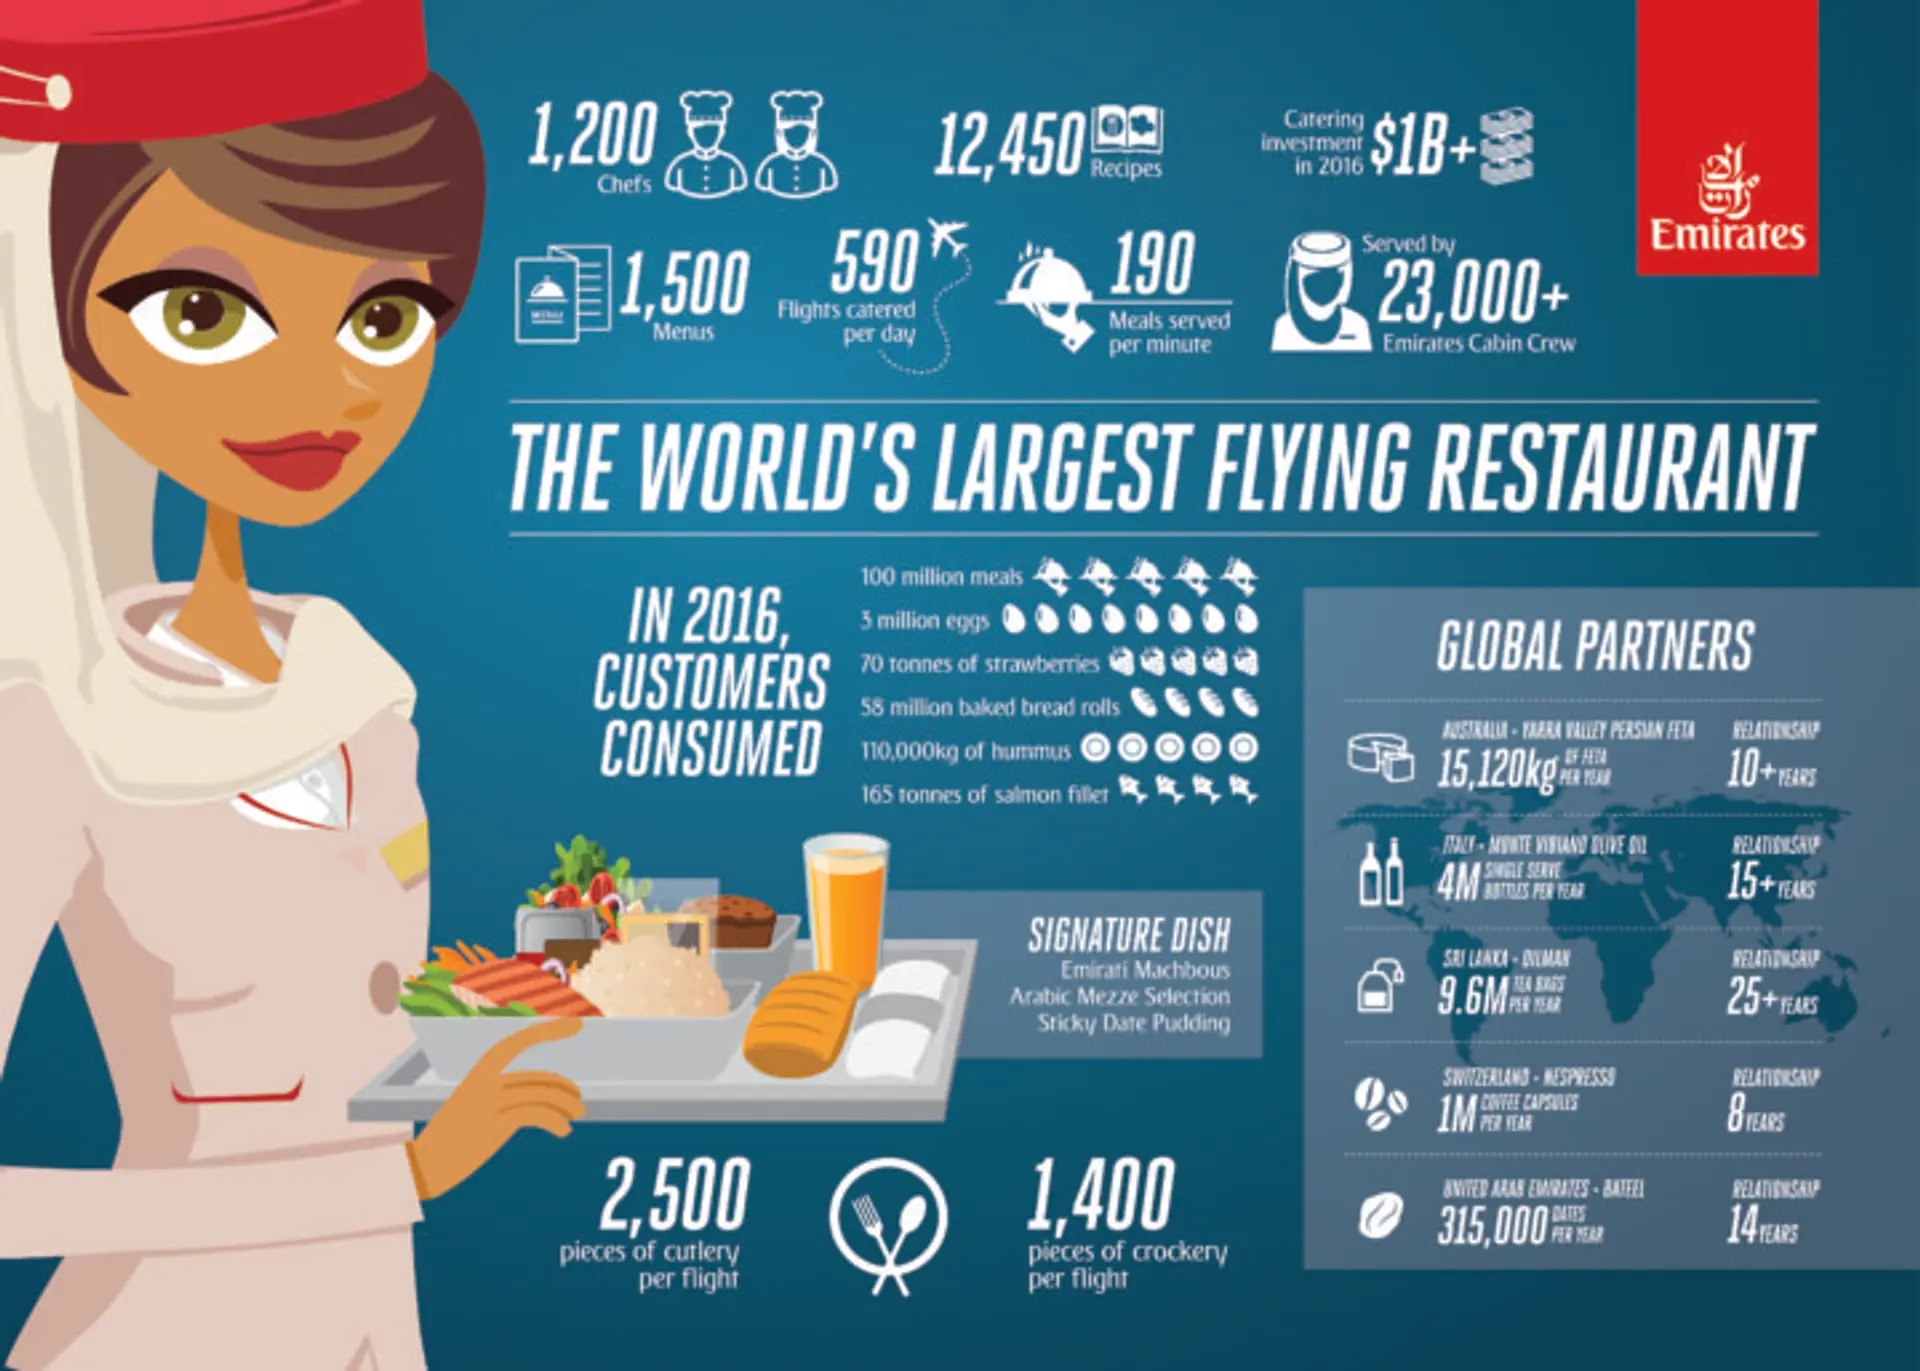 Catering-infographic_English-720x514.jpg